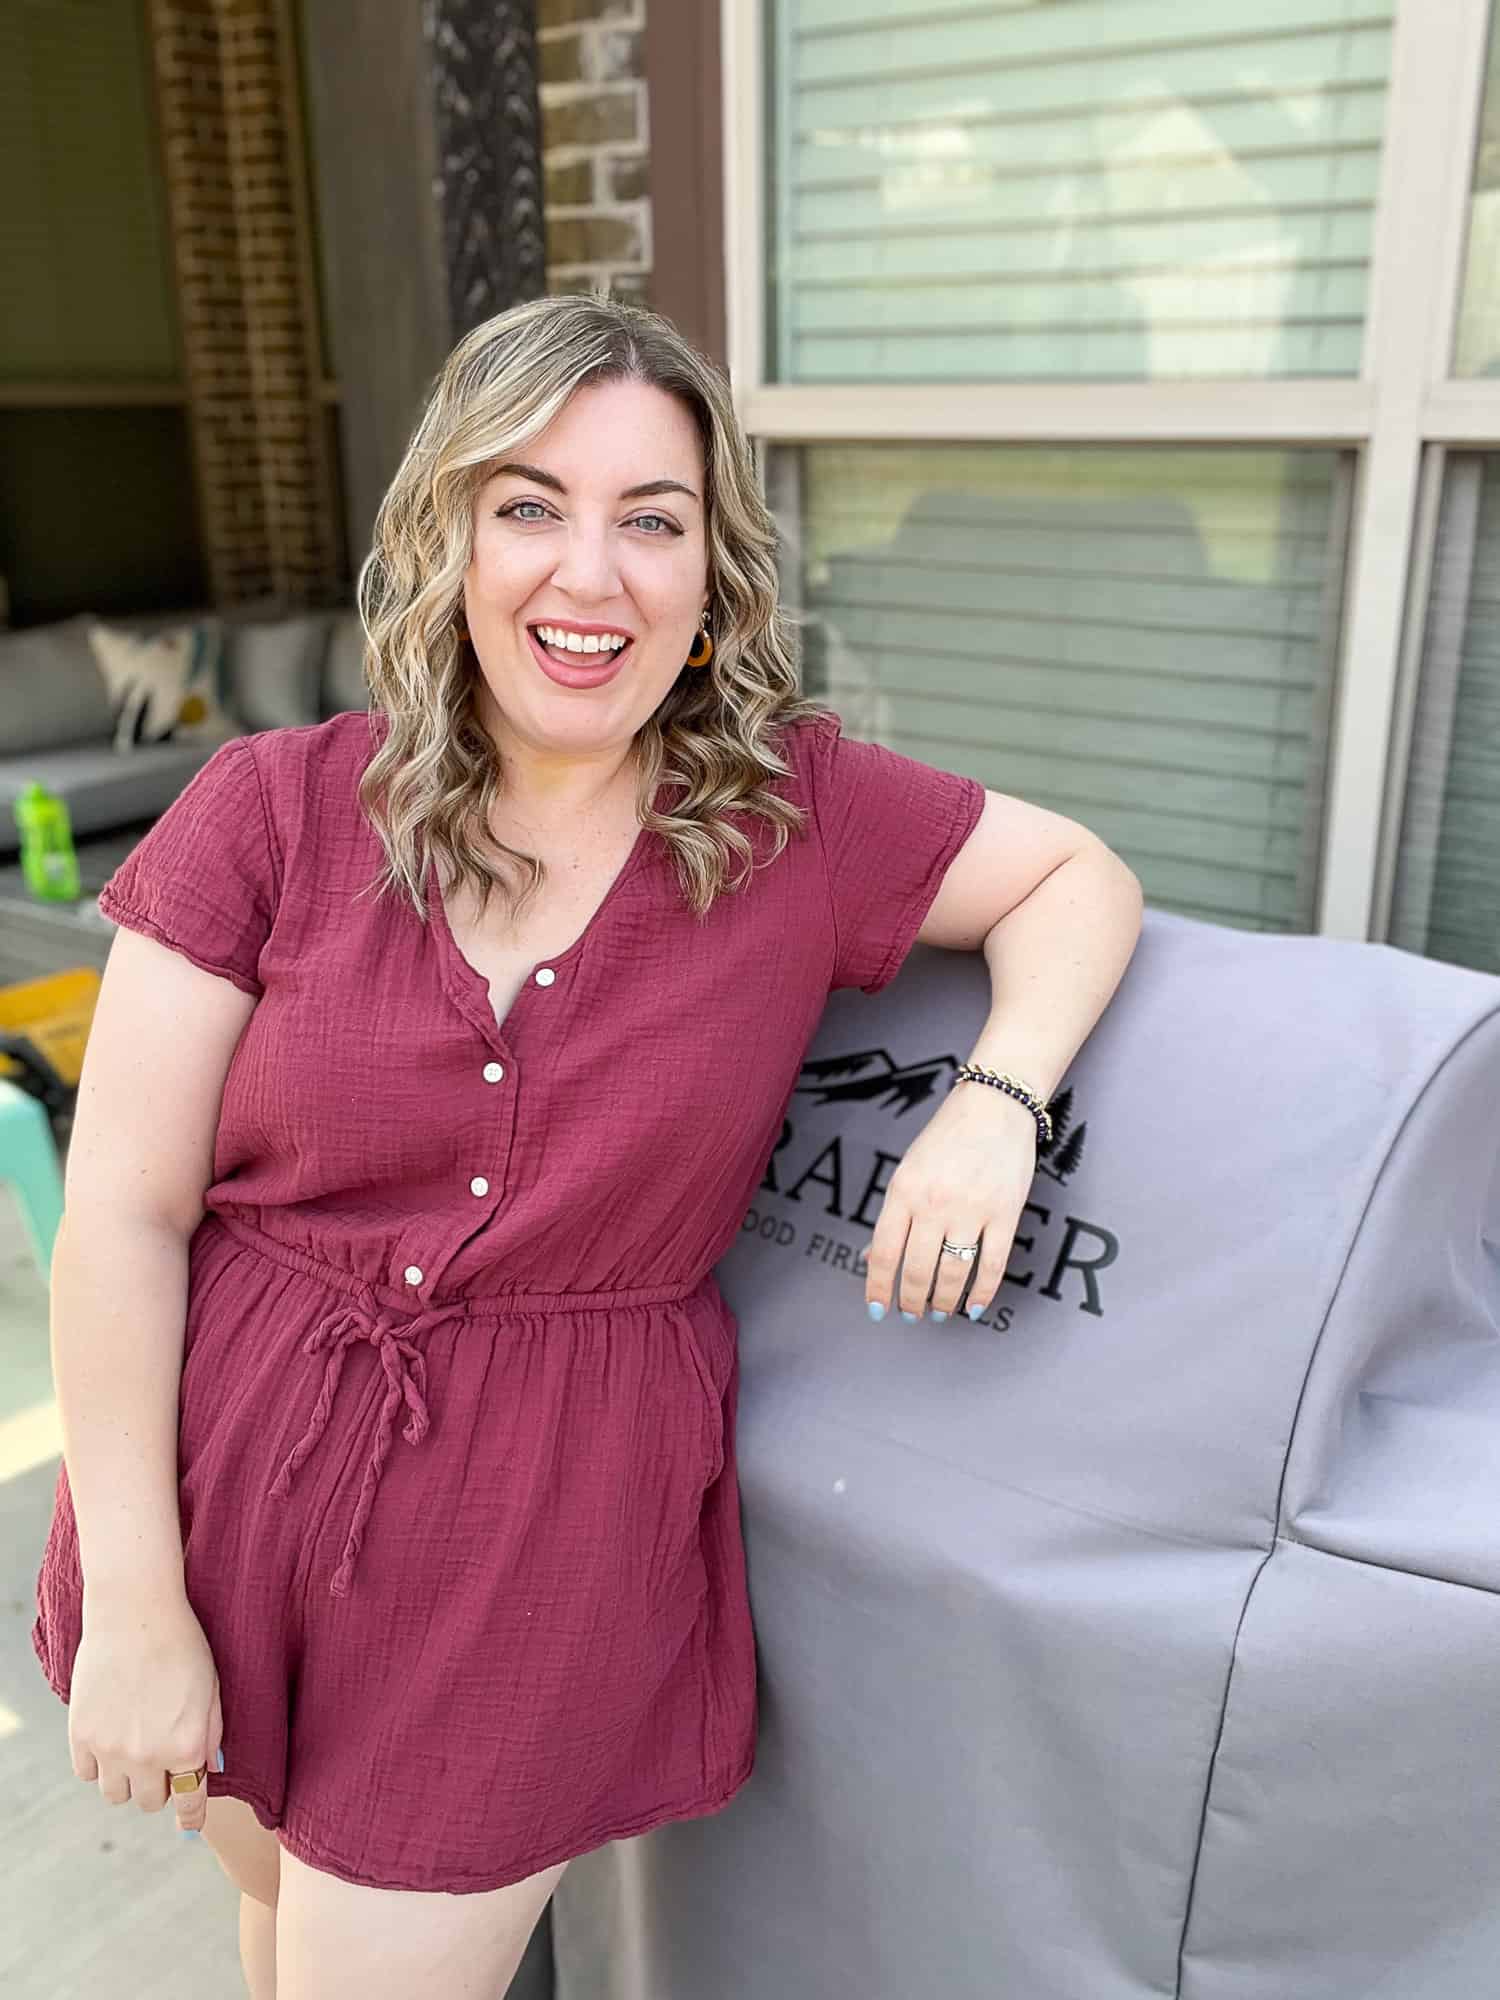 Jenna Passaro food blogger with Traeger grills covered